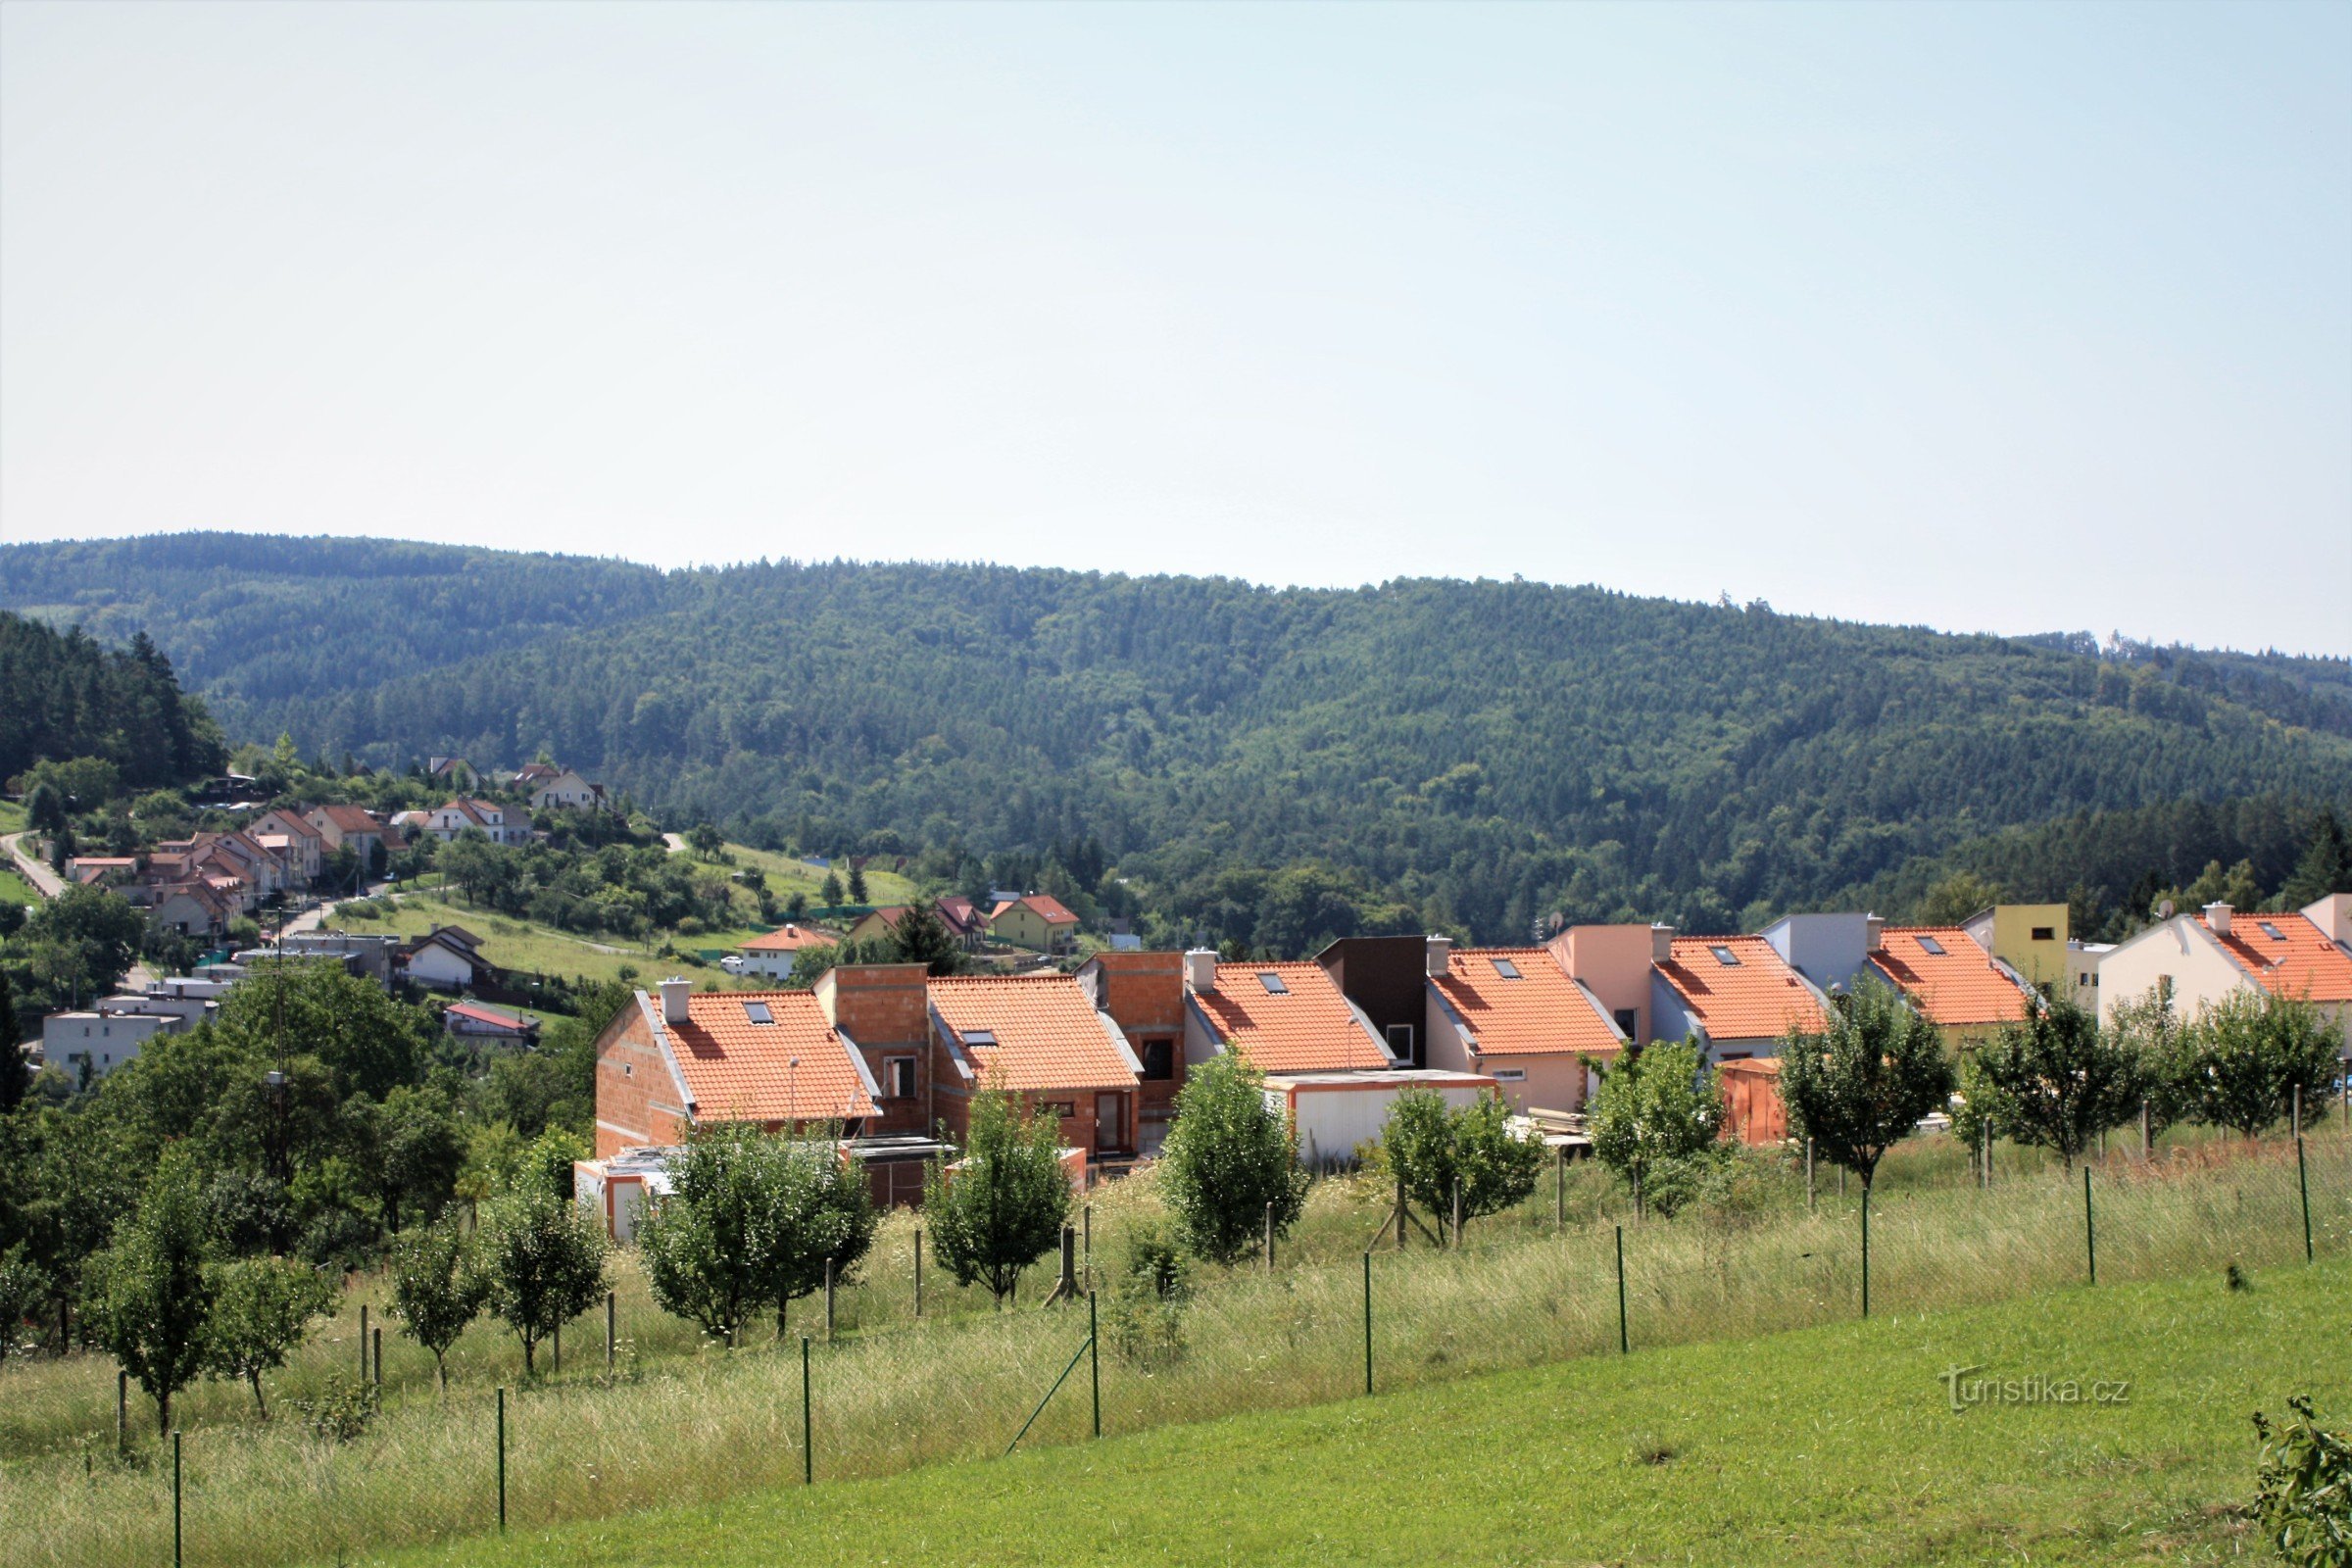 View across the new houses in Kanice to the confluence of the Kanické potok and the Časnýra